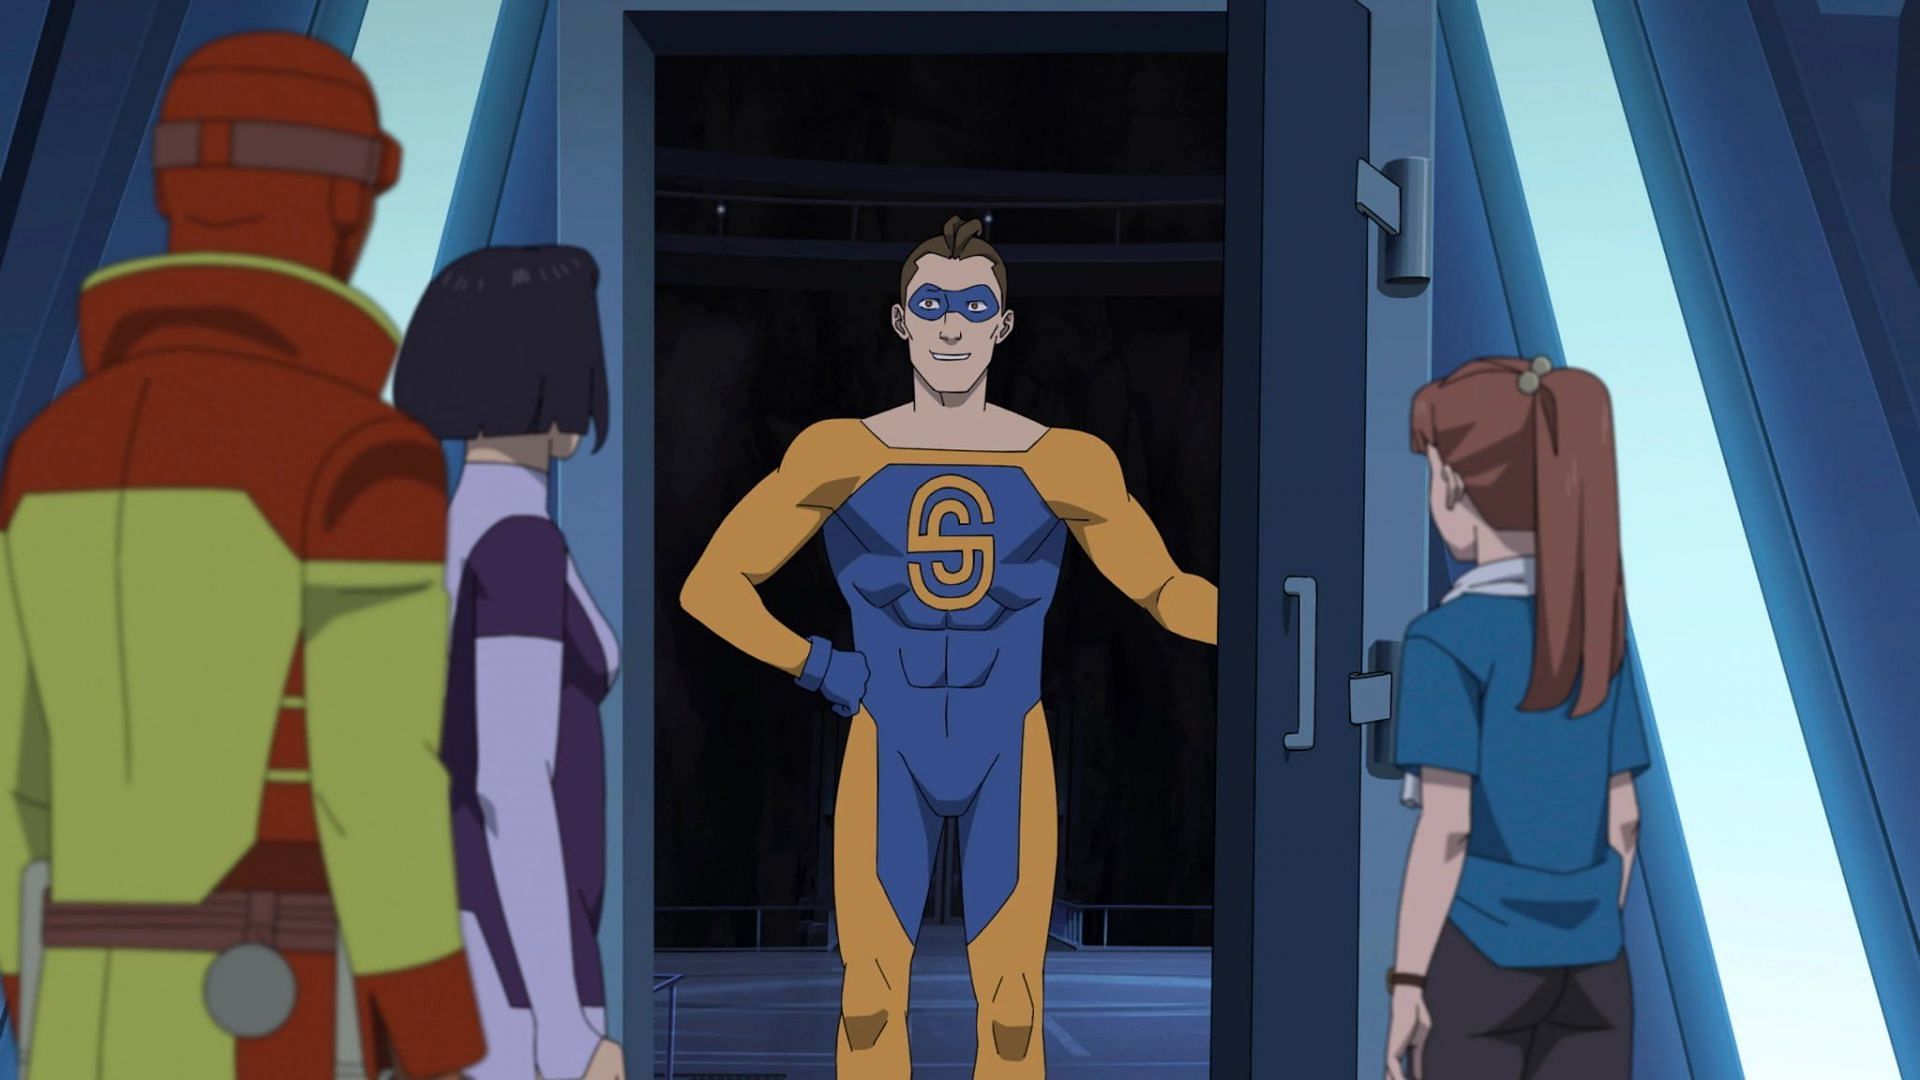 From comedy to superheroes: Ben Schwartz steps into the animated world of Invincible as Shapesmith (Image via Prime Video)